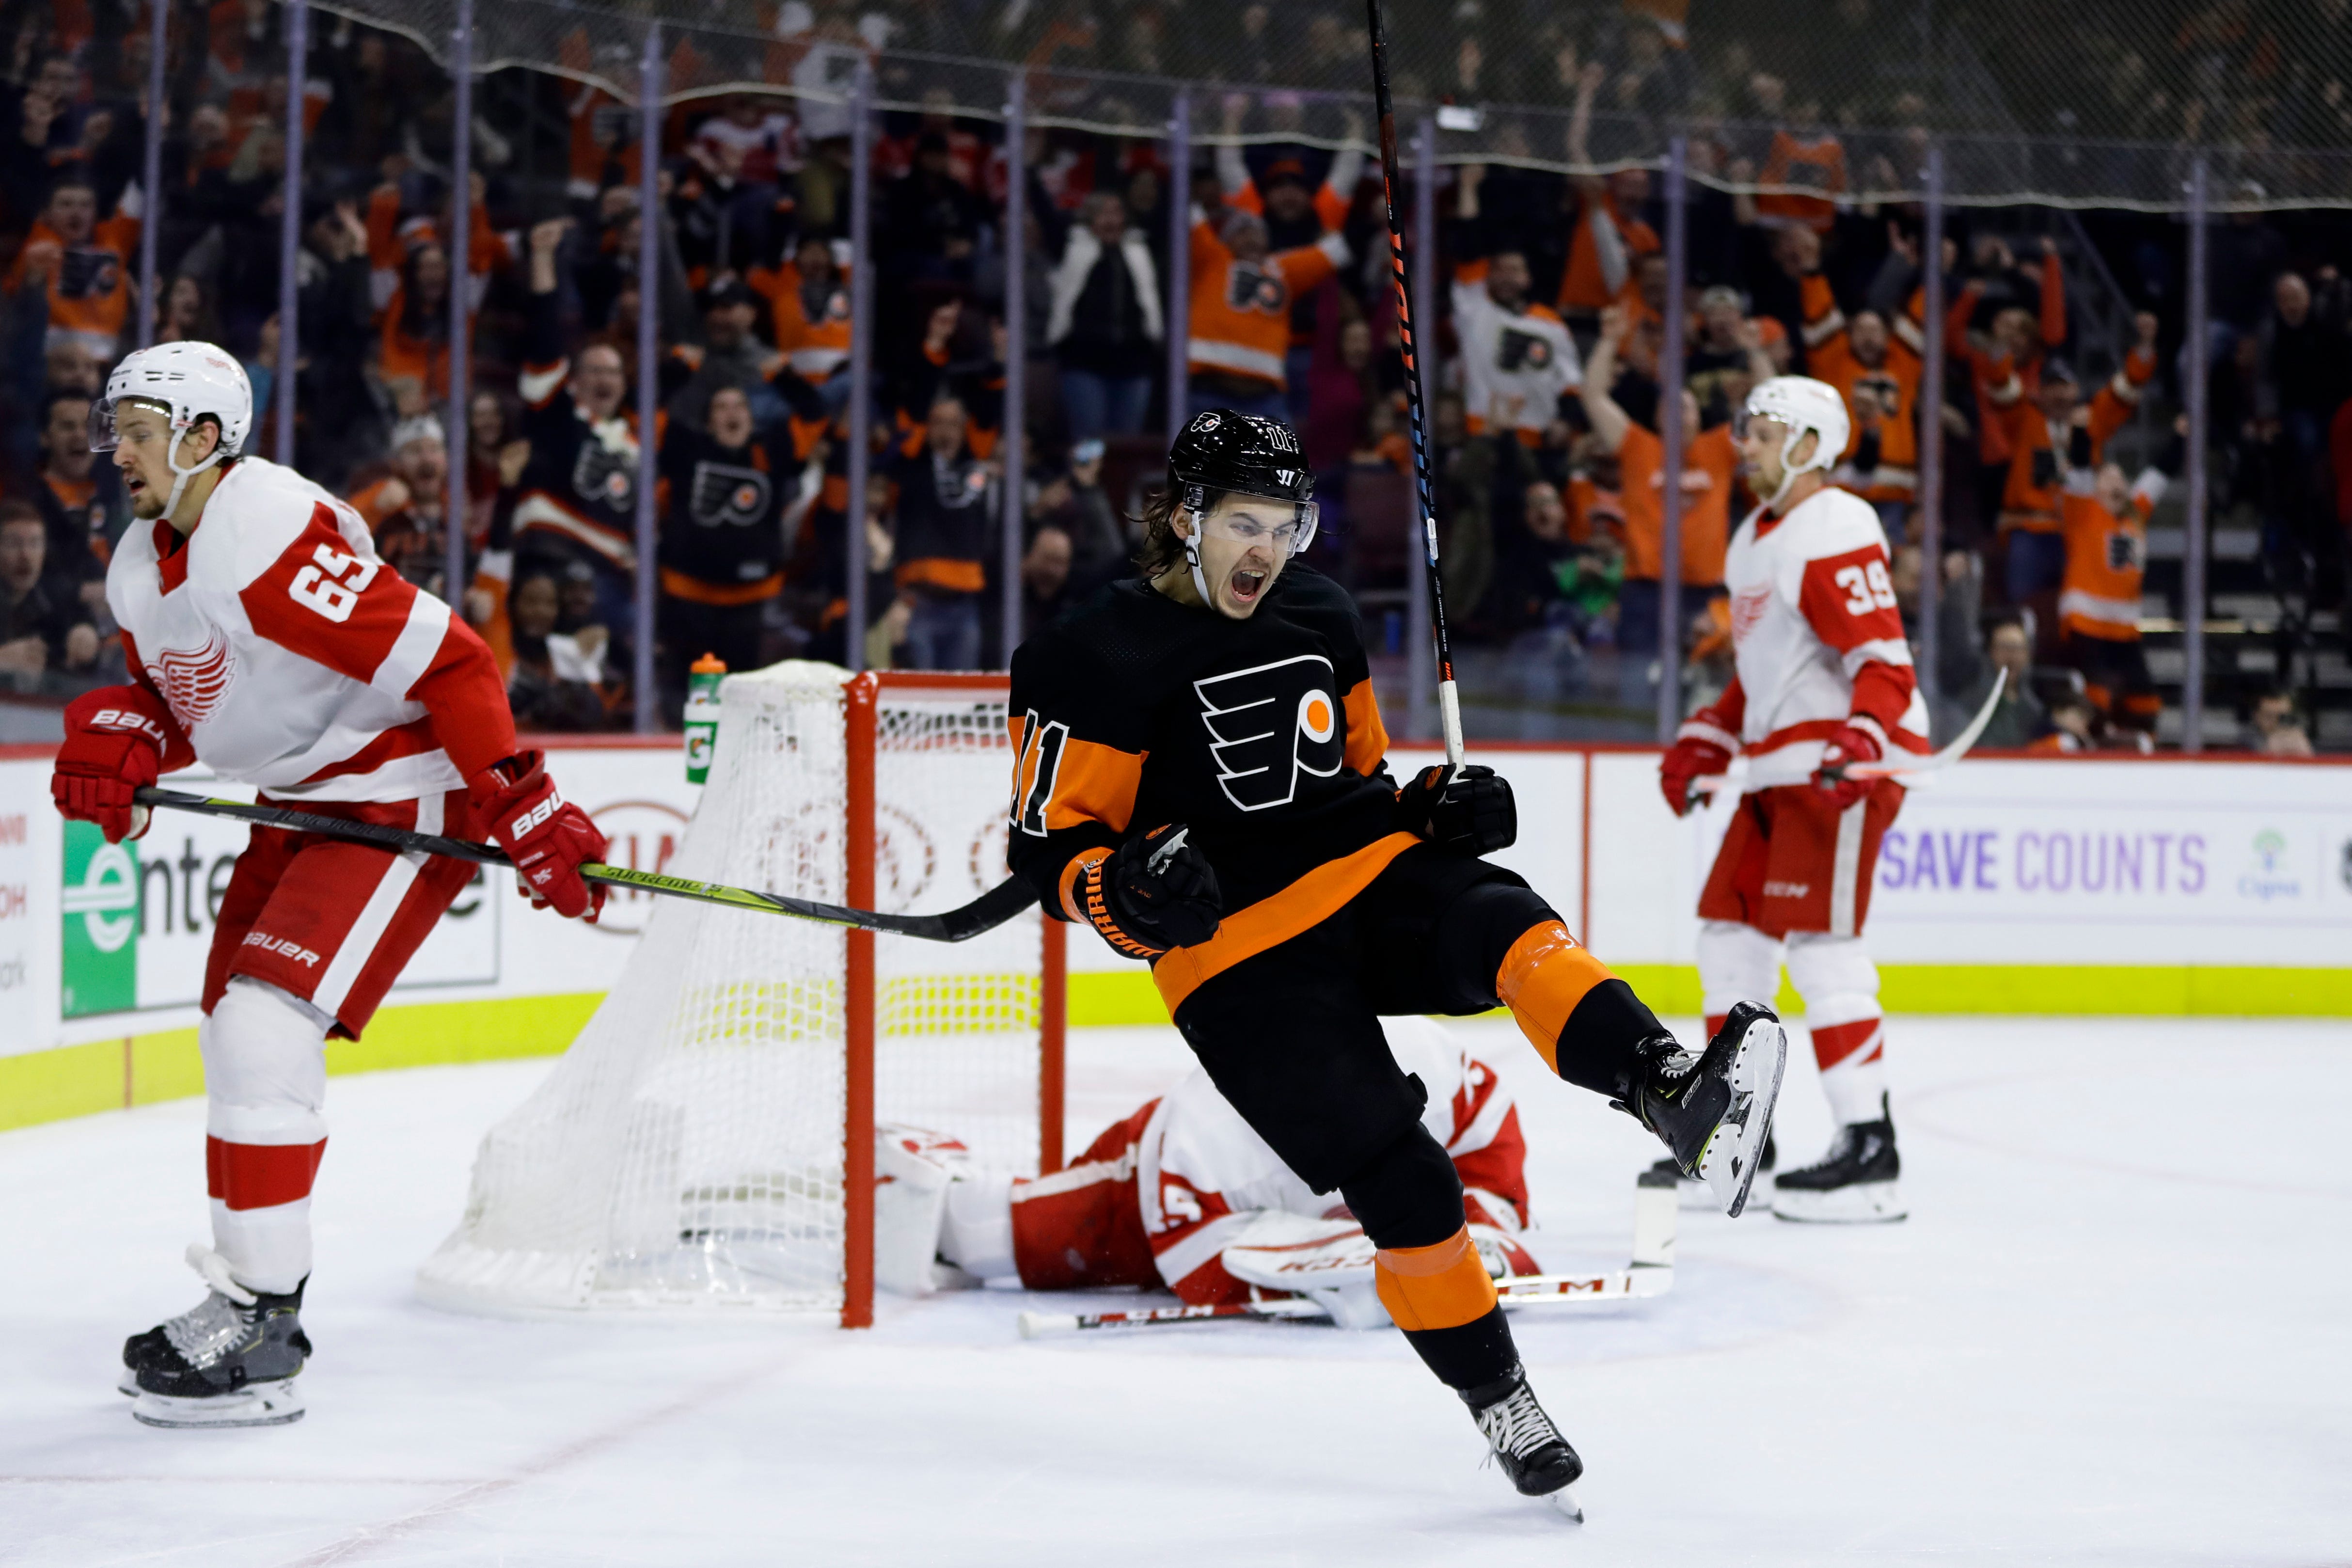 Philadelphia Flyers' Travis Konecny (11) celebrates after scoring the game-winning goal during overtime Saturday. The Flyers defeated the Red Wings 6-5.